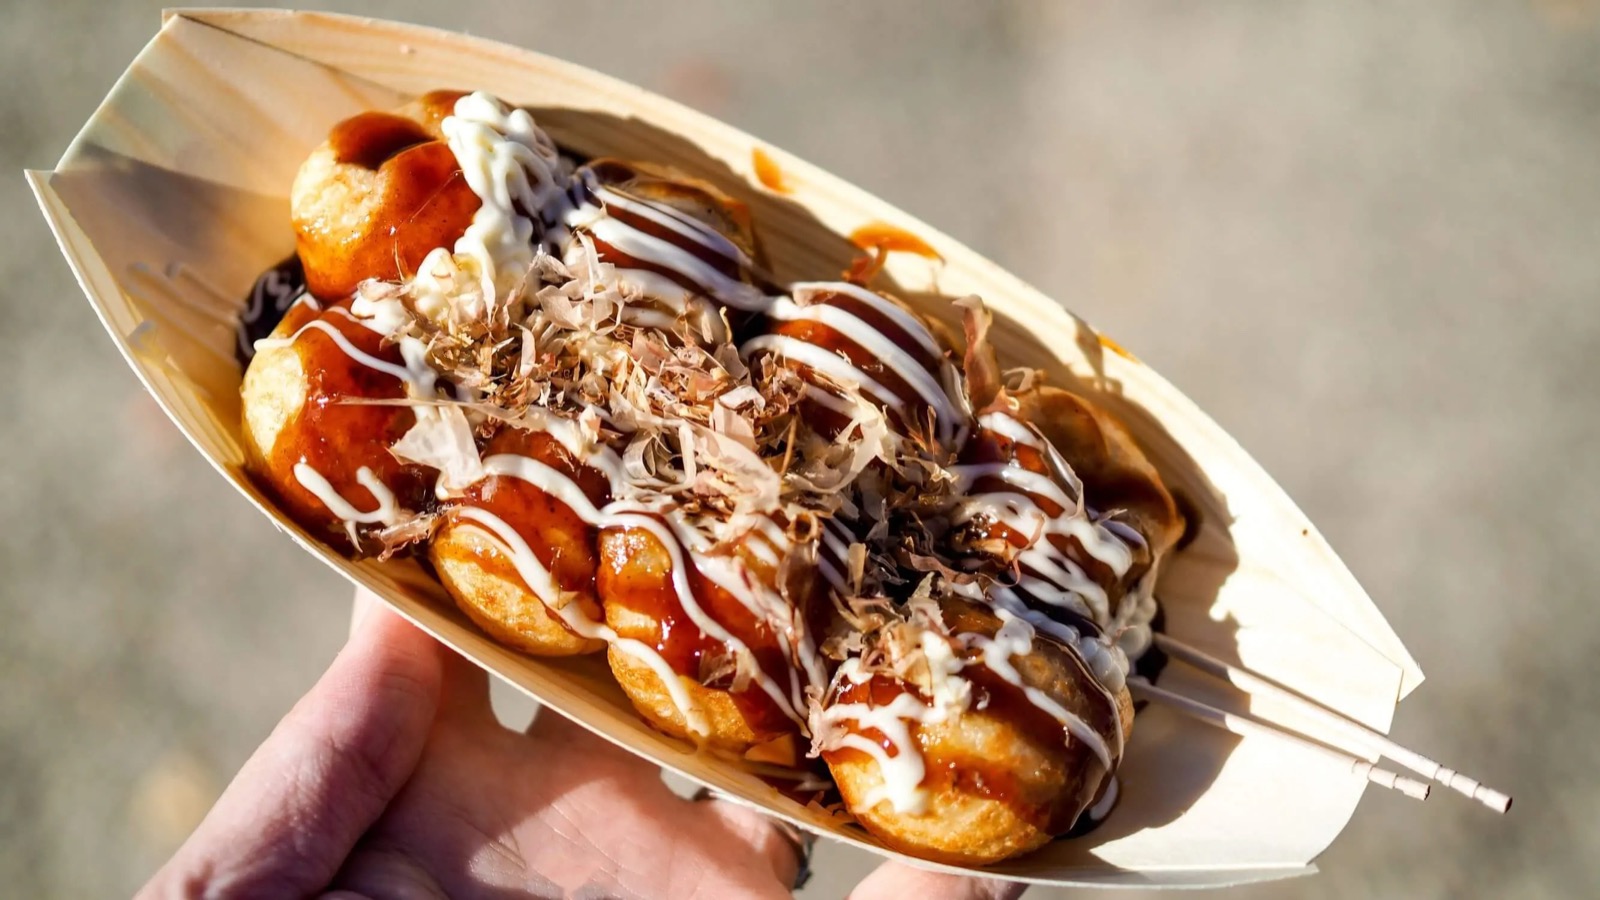 🌭 Here Are 24 Street Foods Around the World – Can You Match Them to Their Continent? Japanese Octopus Balls Takoyaki